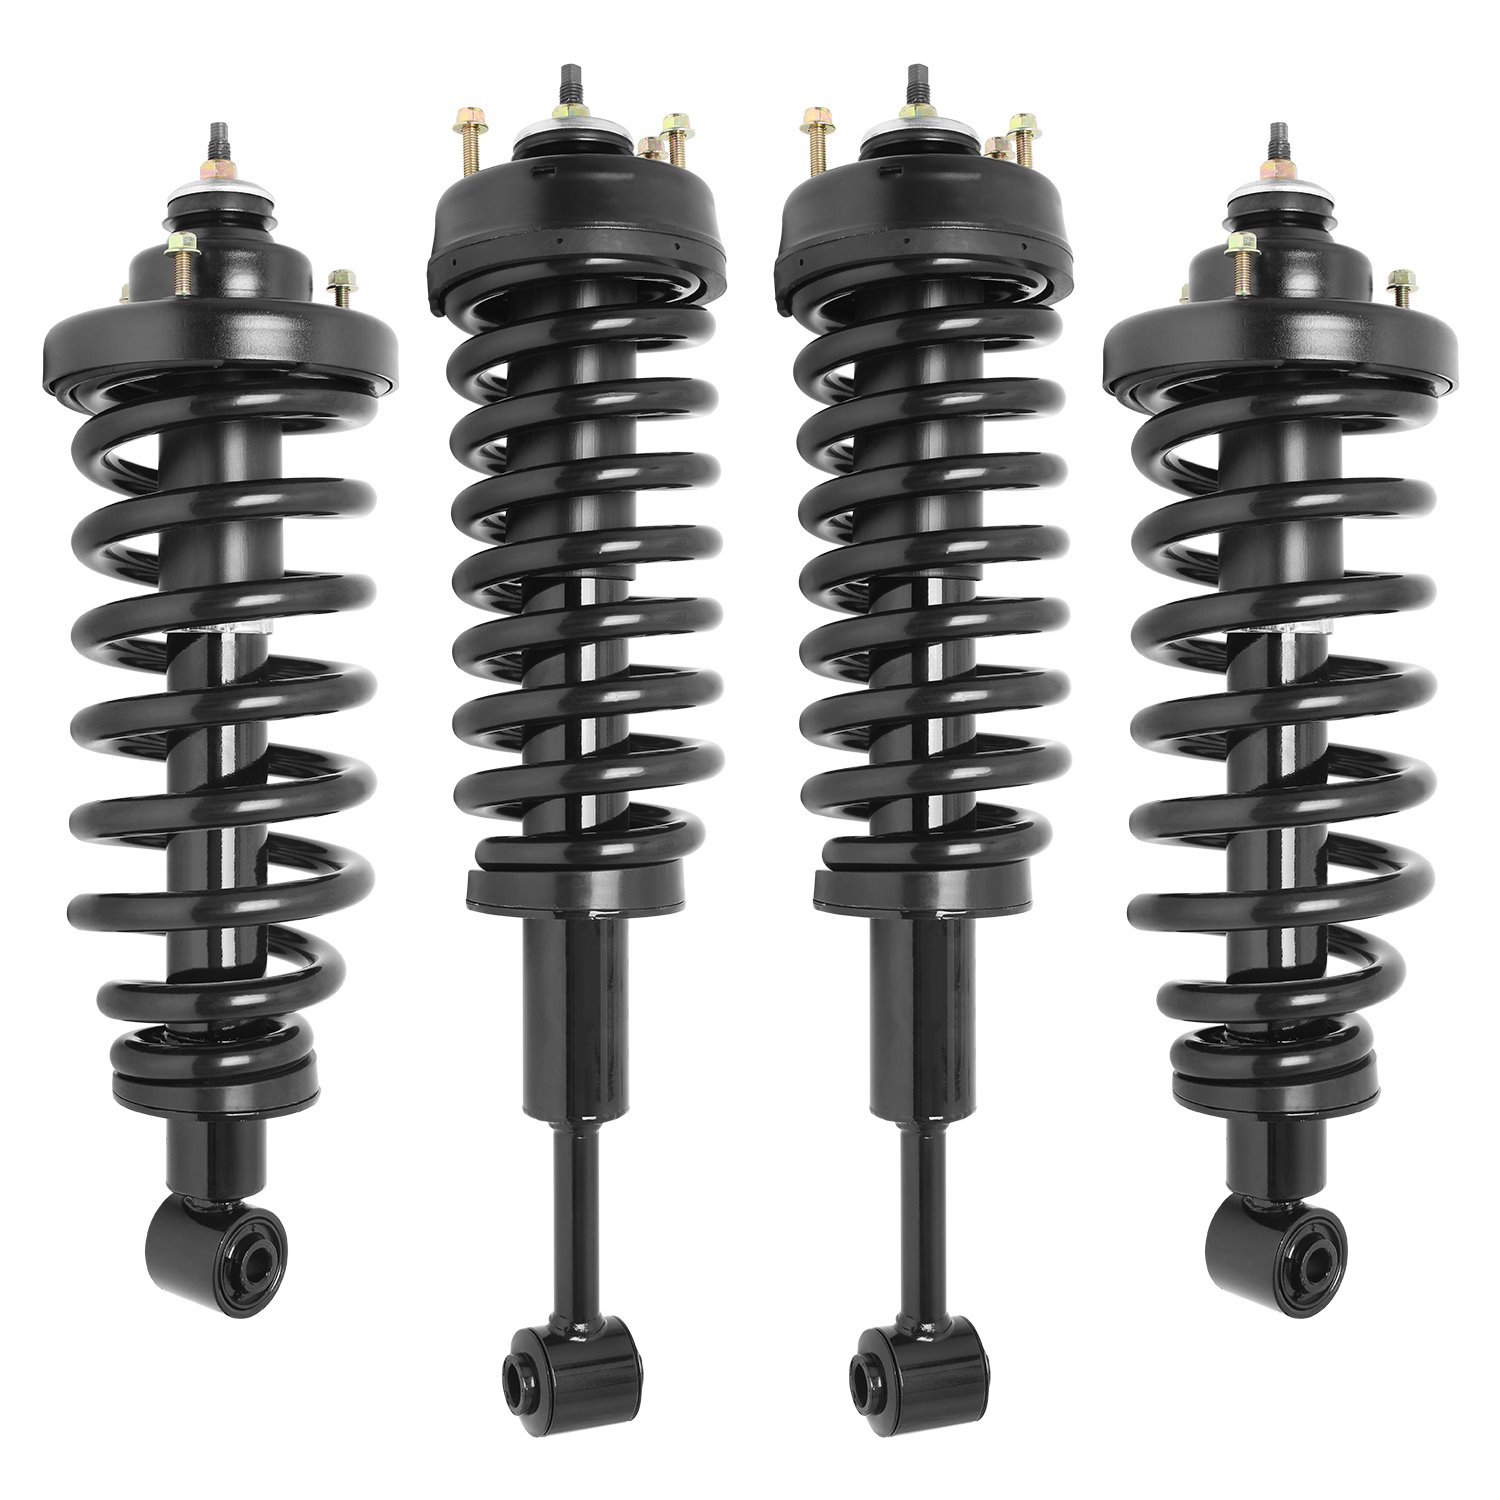 4-11850-15140-001 Front & Rear Suspension Strut & Coil Spring Assembly Kit Fits Select Ford Explorer Sport Trac